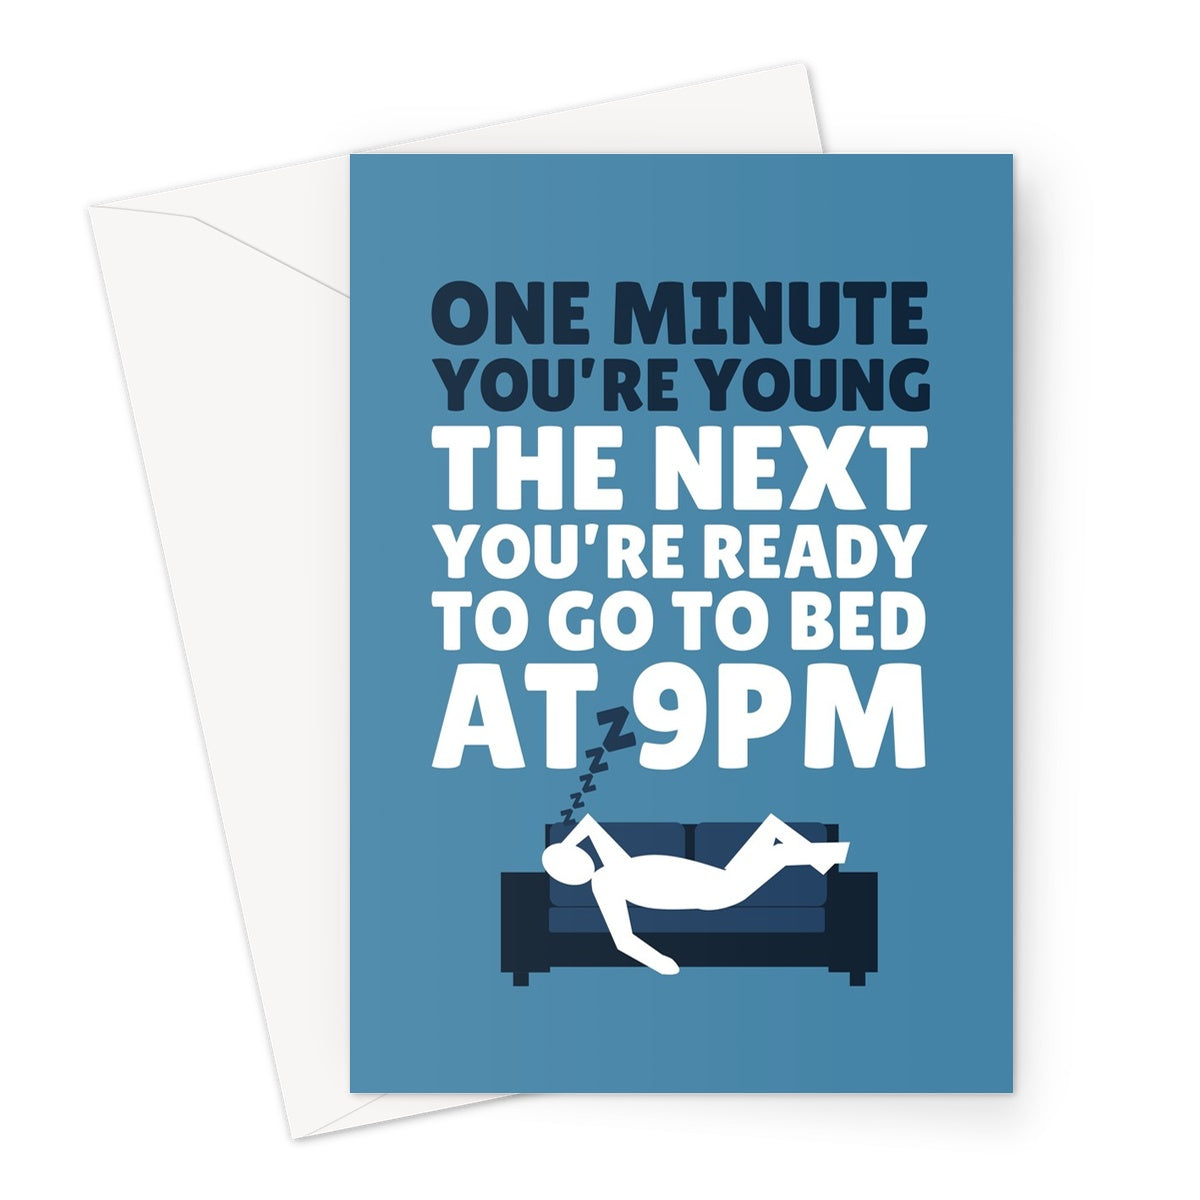 One Minute You're Young The Next You're Ready To Go To Bed At 9PM Funny Birthday Getting Older Sleep Tired Greeting Card